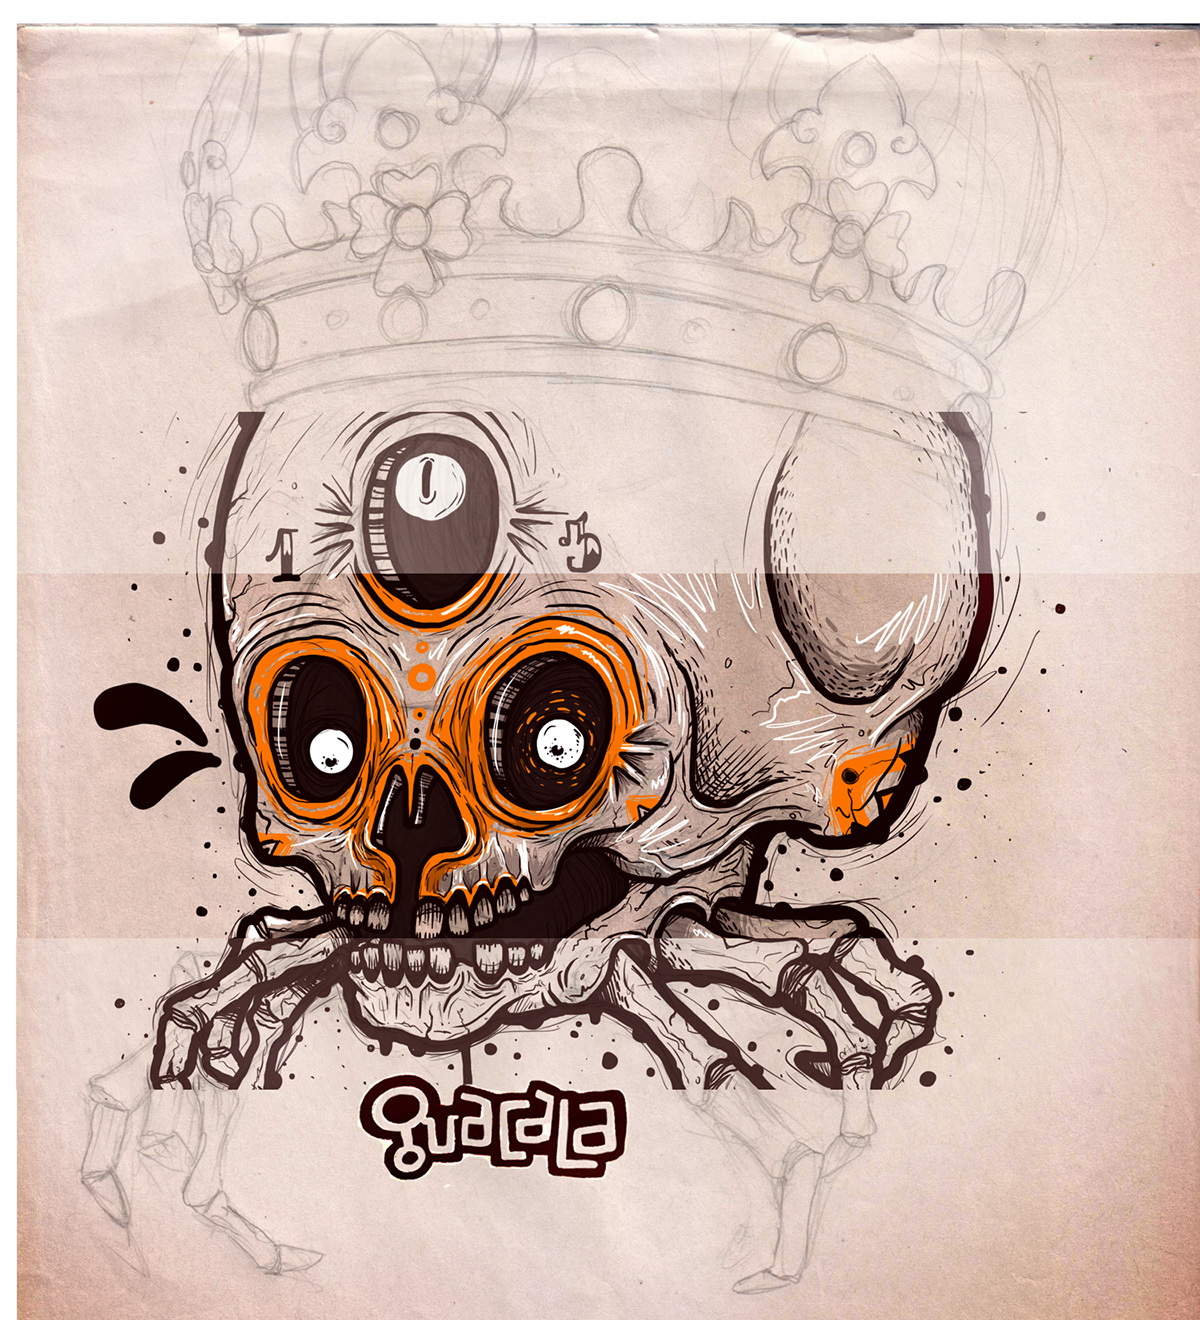 sticker stickerbomb skull Character guacala "colectivo guacala"